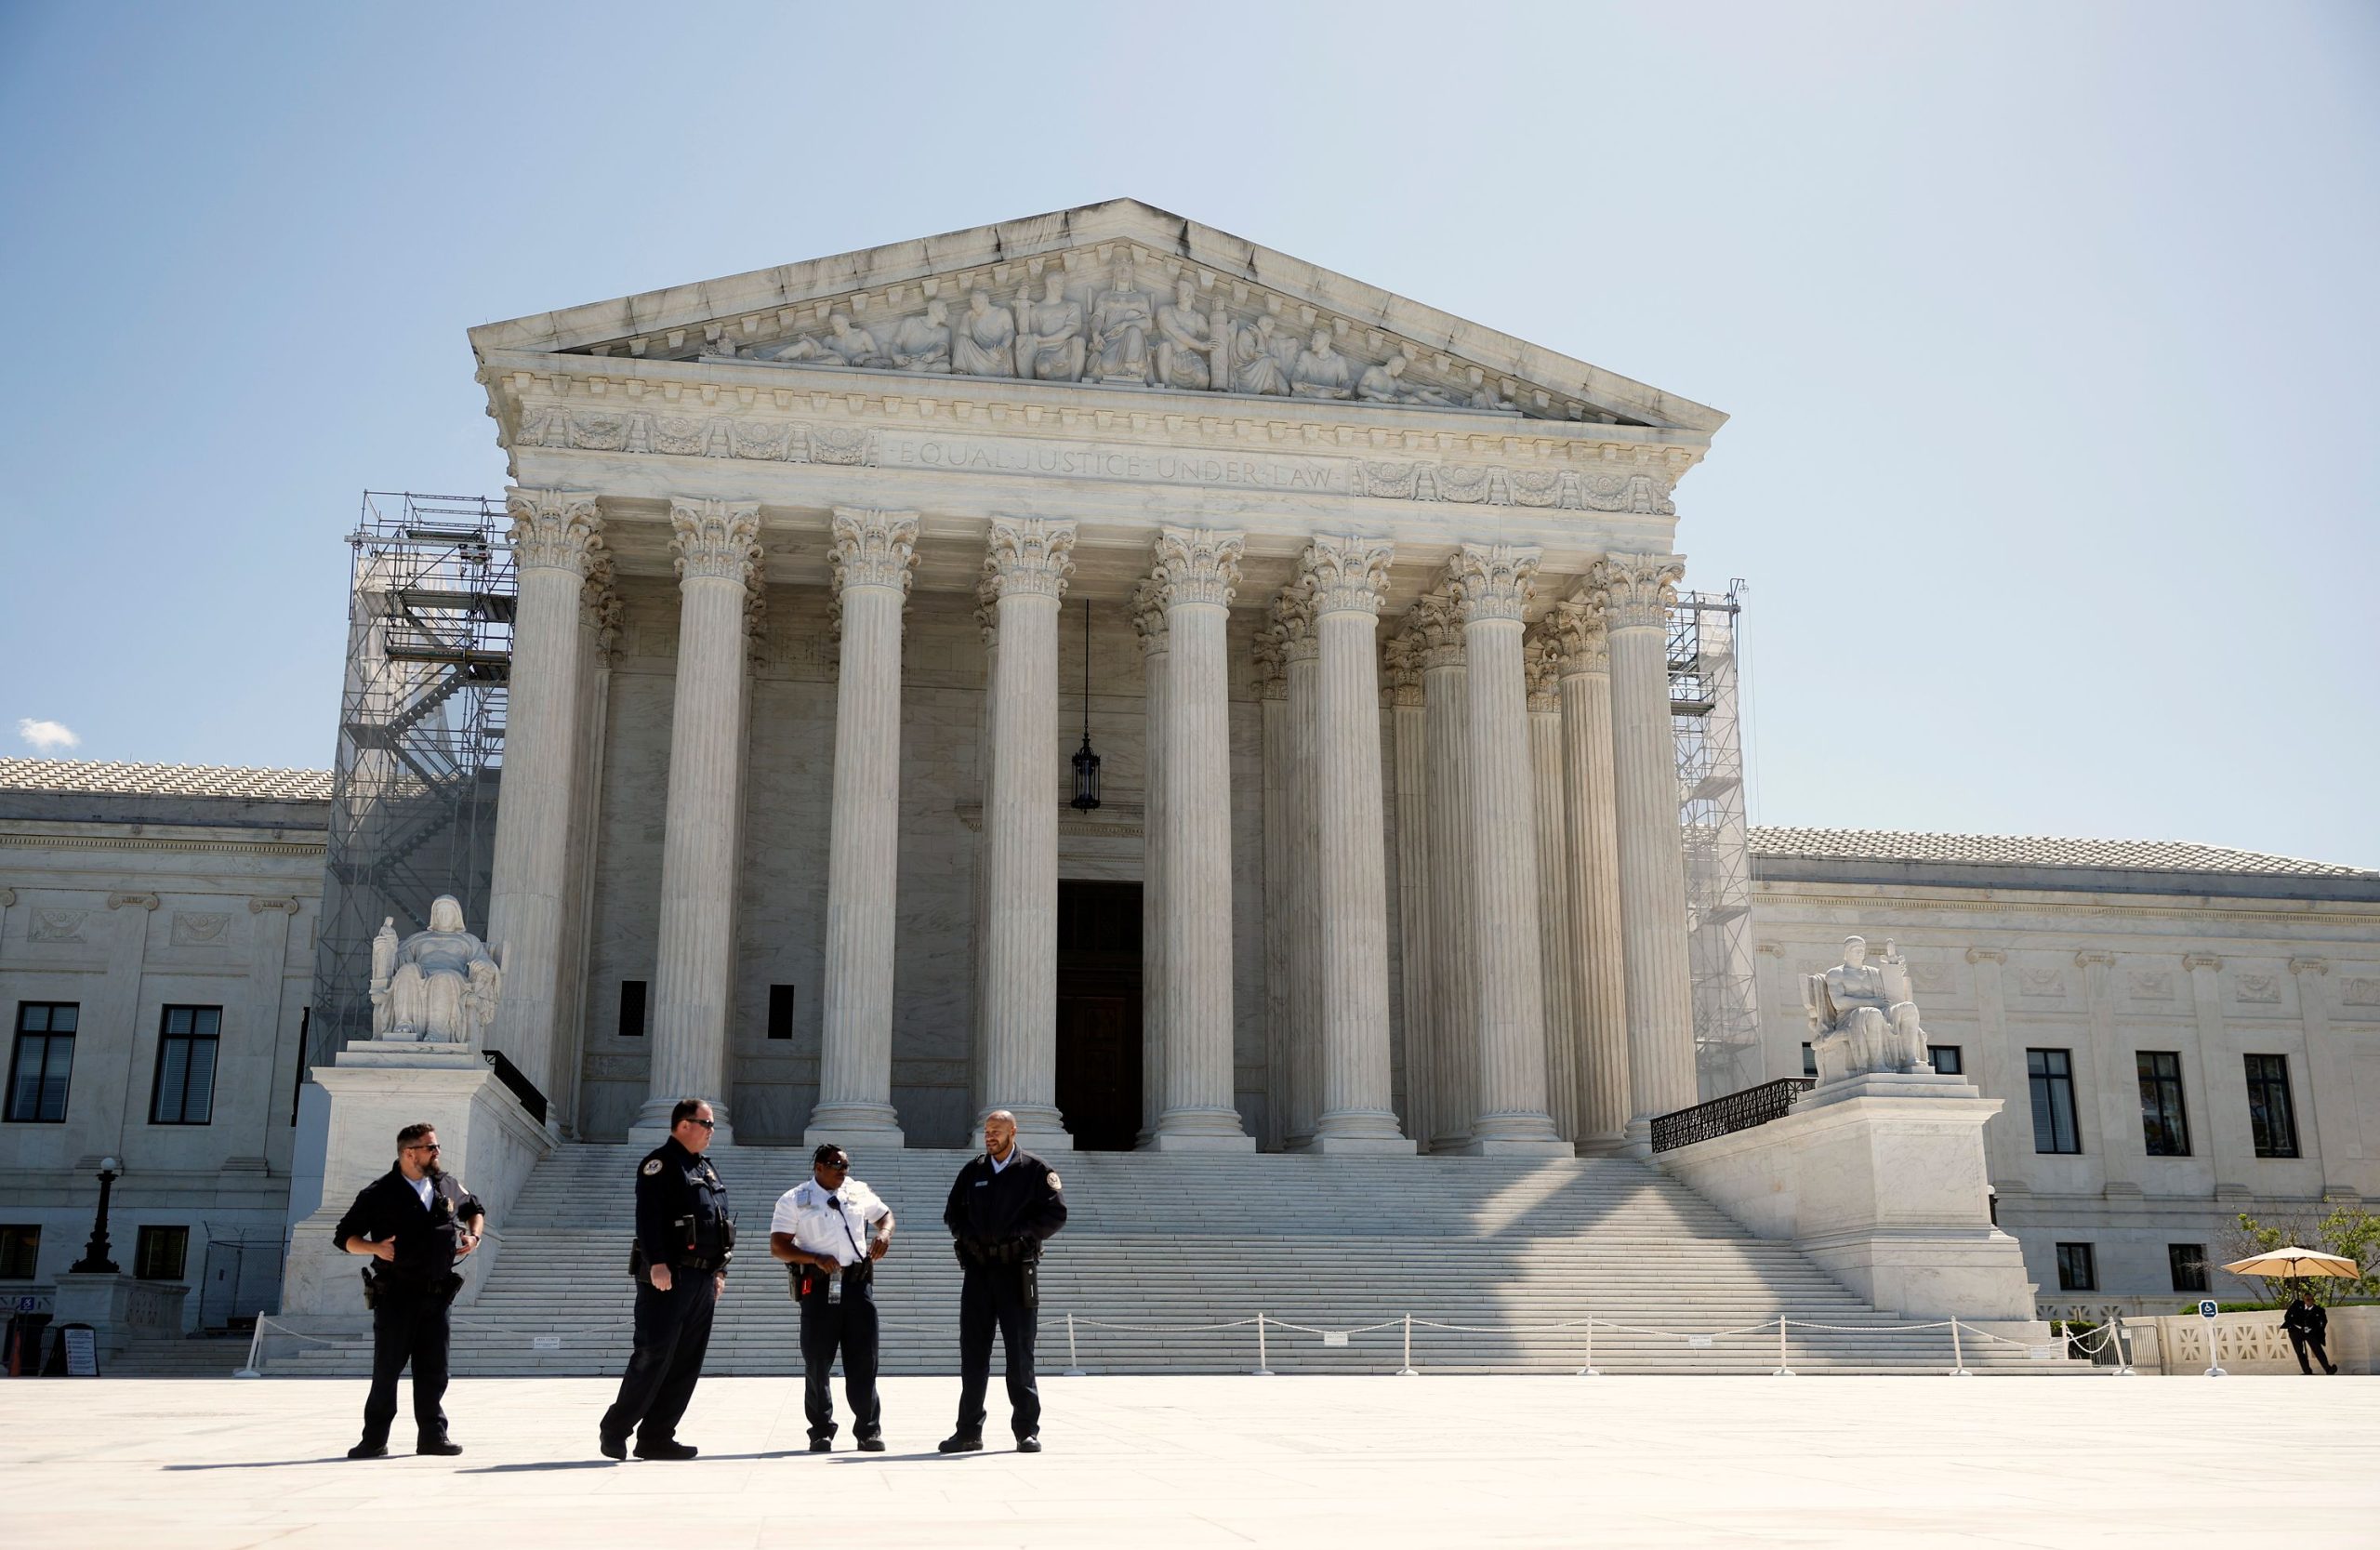 Supreme Court to Decide on Abortion, Gun Rights, and Trump's Legal Cases Soon